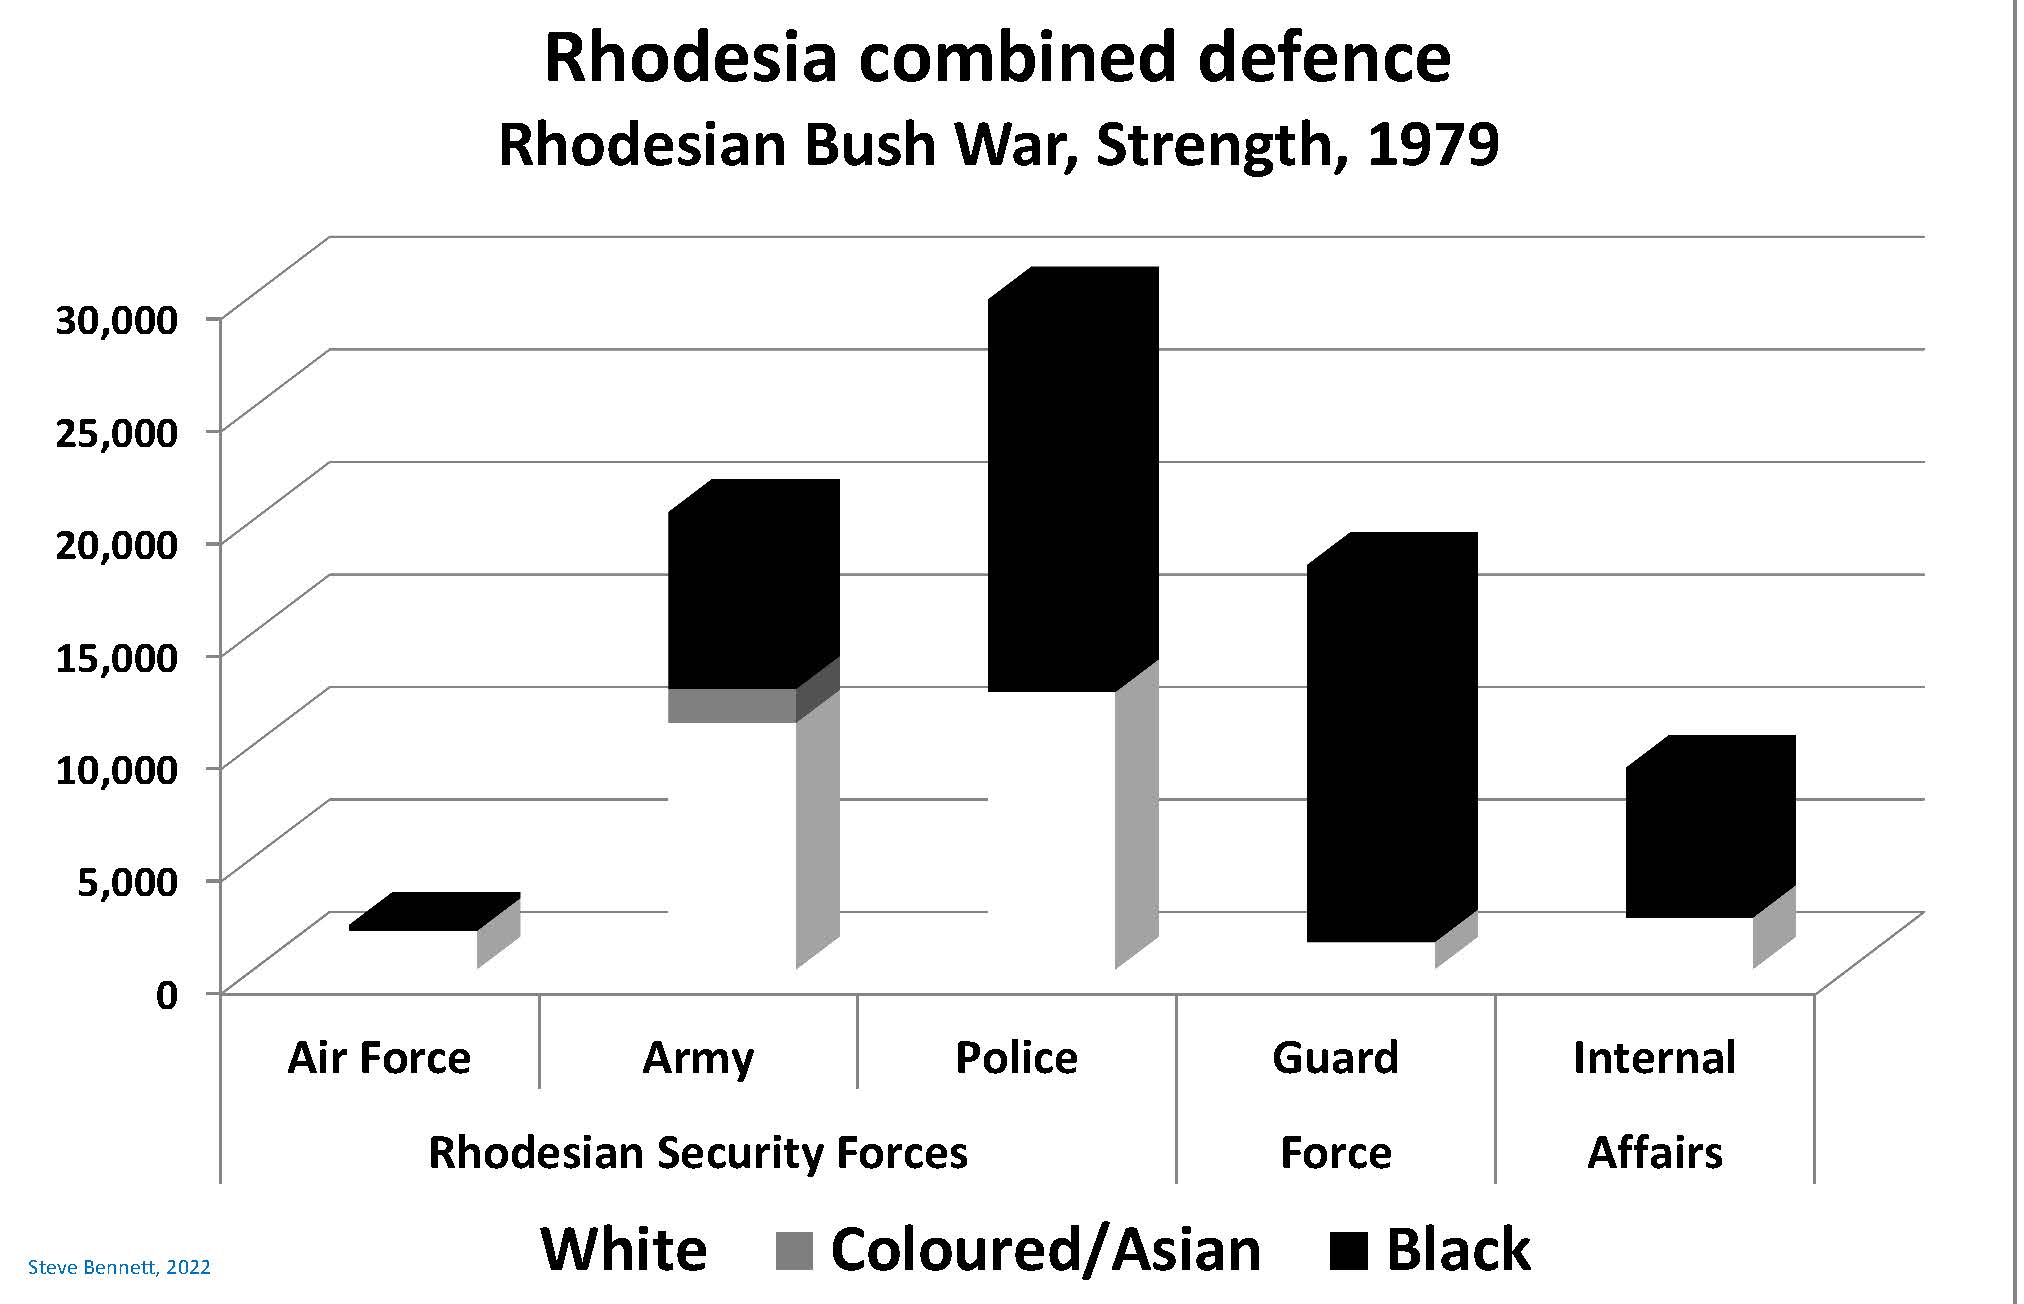 Chart showing composition by race of Rhodesian defence personnel during Rhodesian Bush War